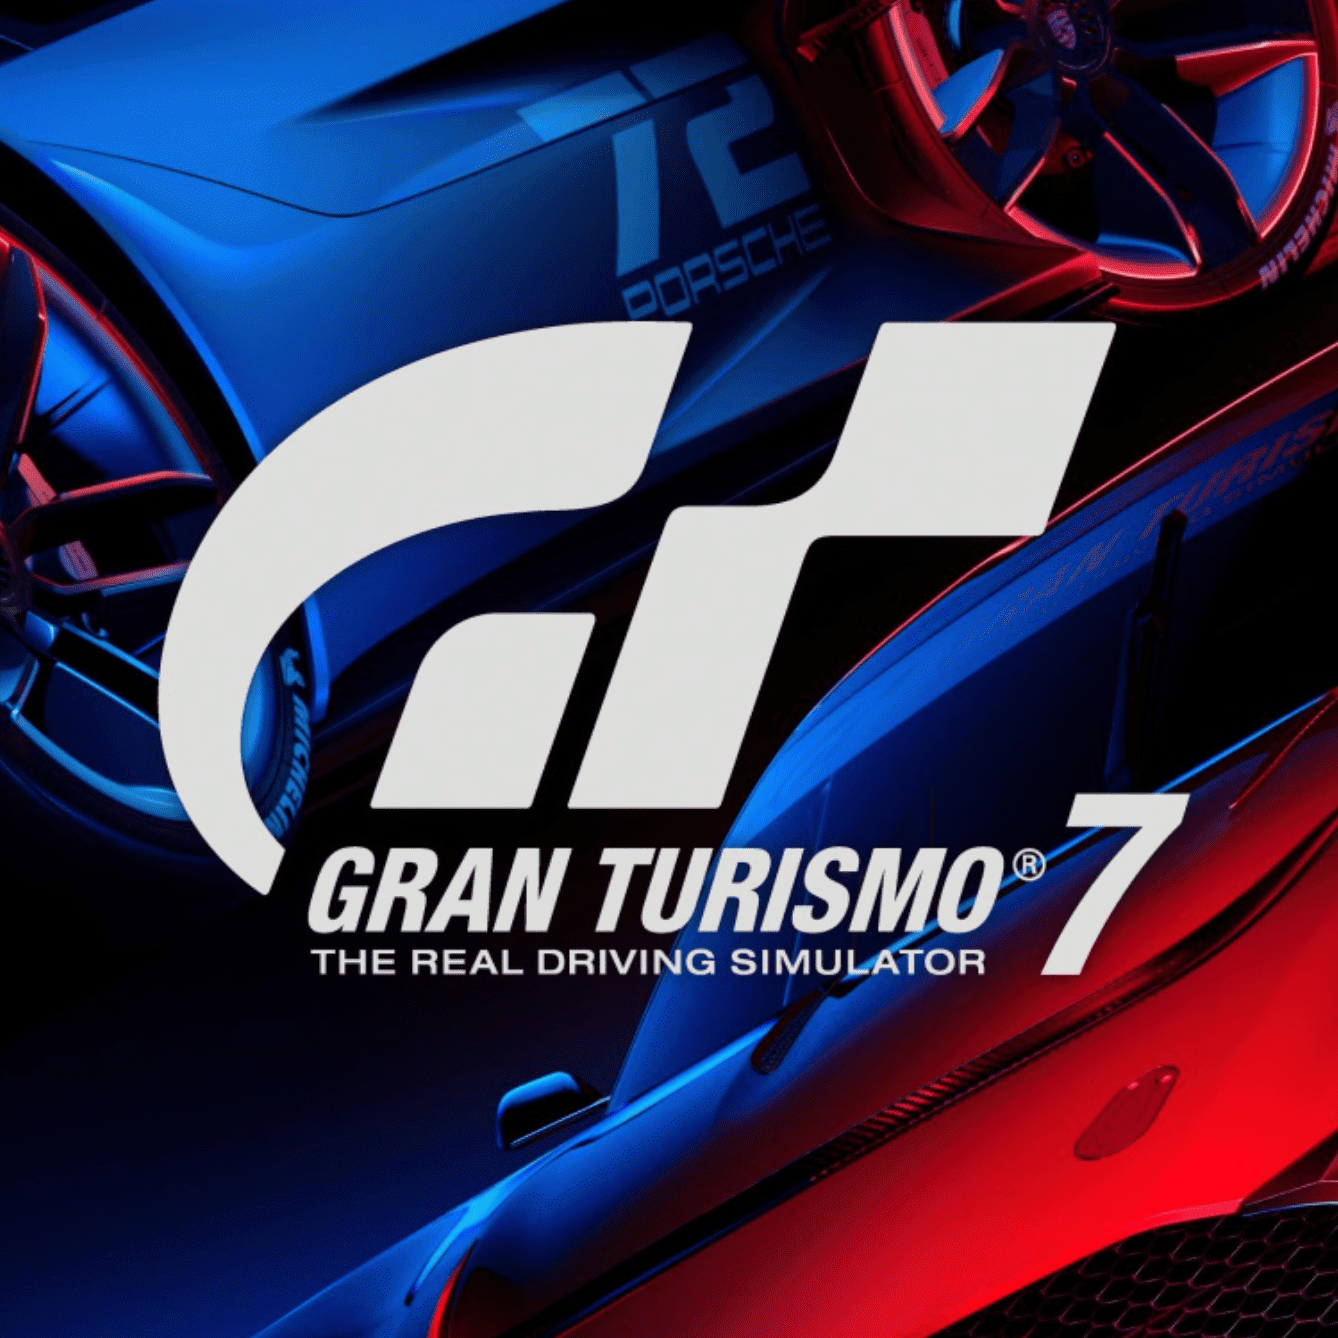 The Gran Turismo Movie: Is It Good or Bad for Video Games